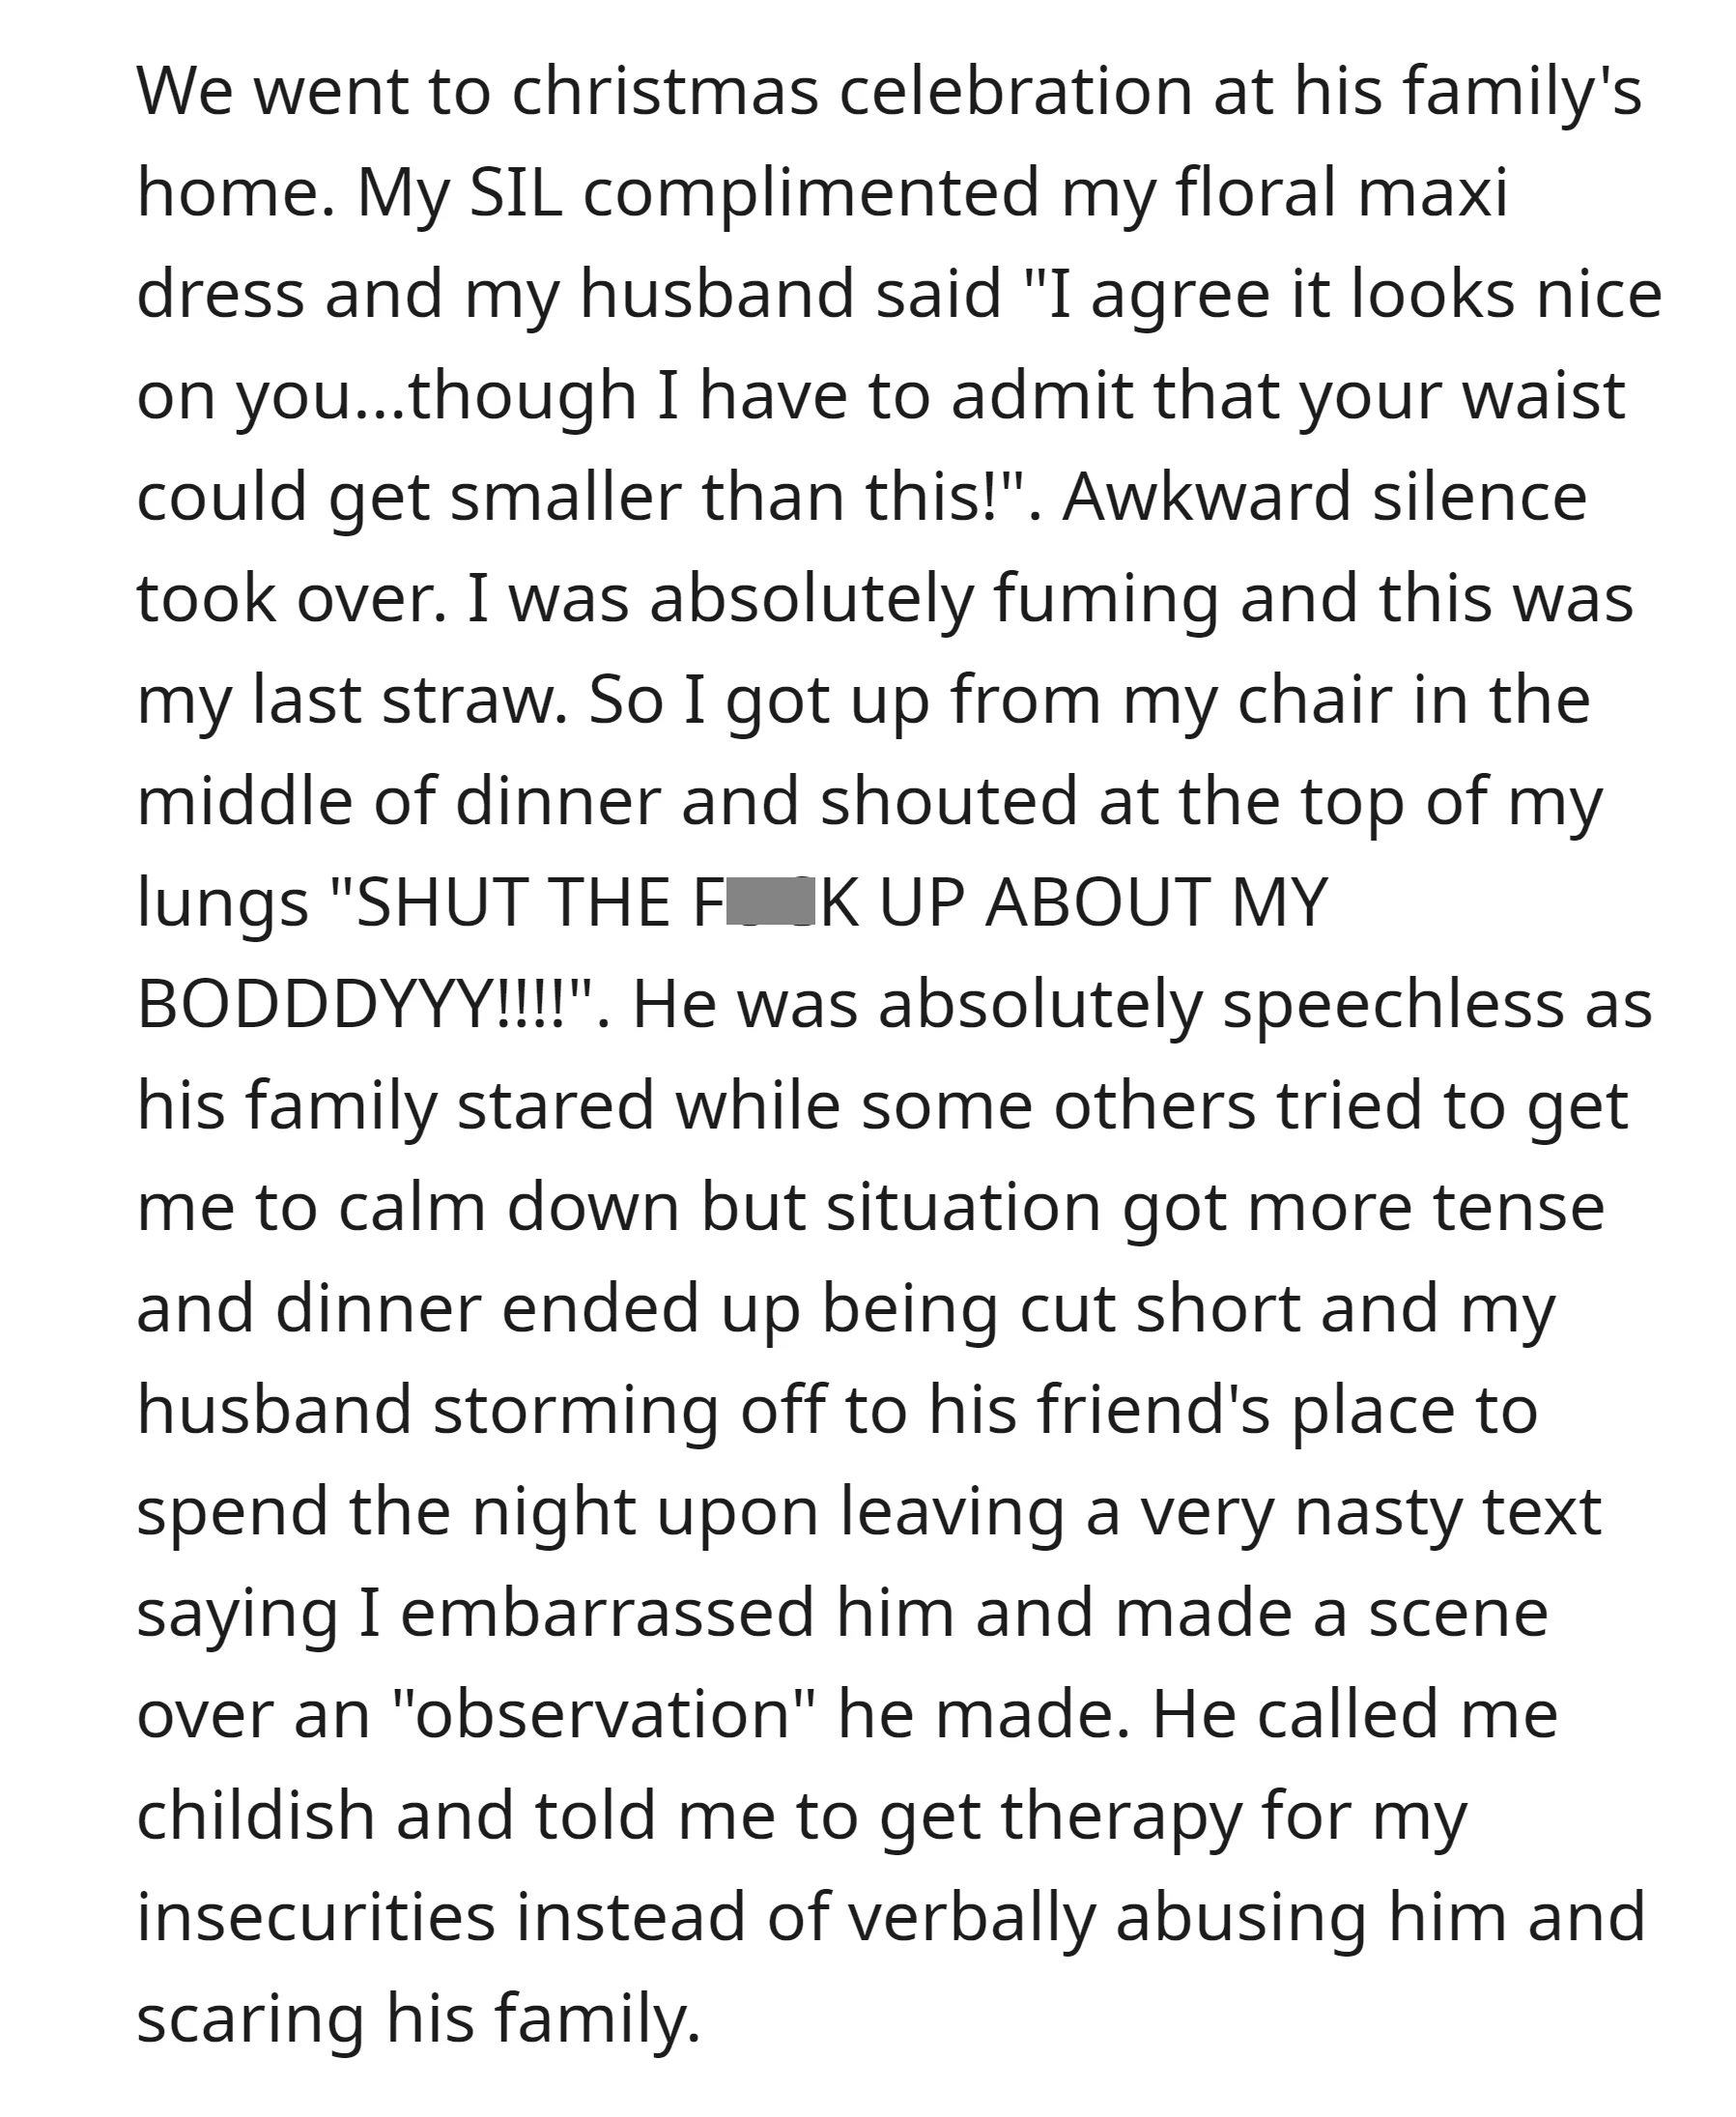 OP's husband made another hurtful comment about her body,